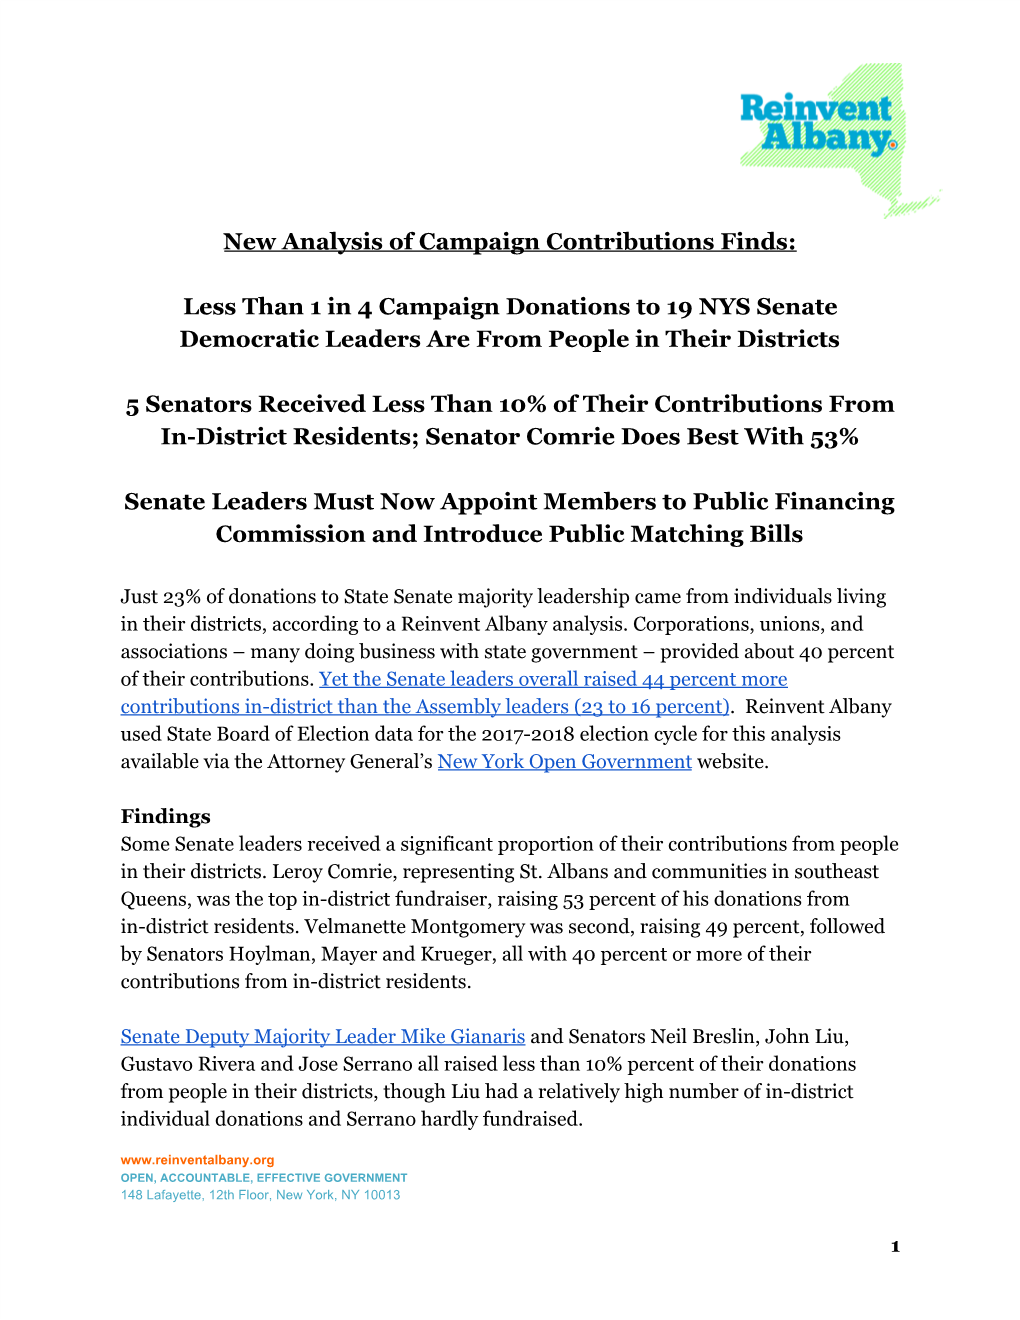 Less Than 1 in 4 Campaign Donations to 19 NYS Senate Democratic Leaders Are from People in Their Districts